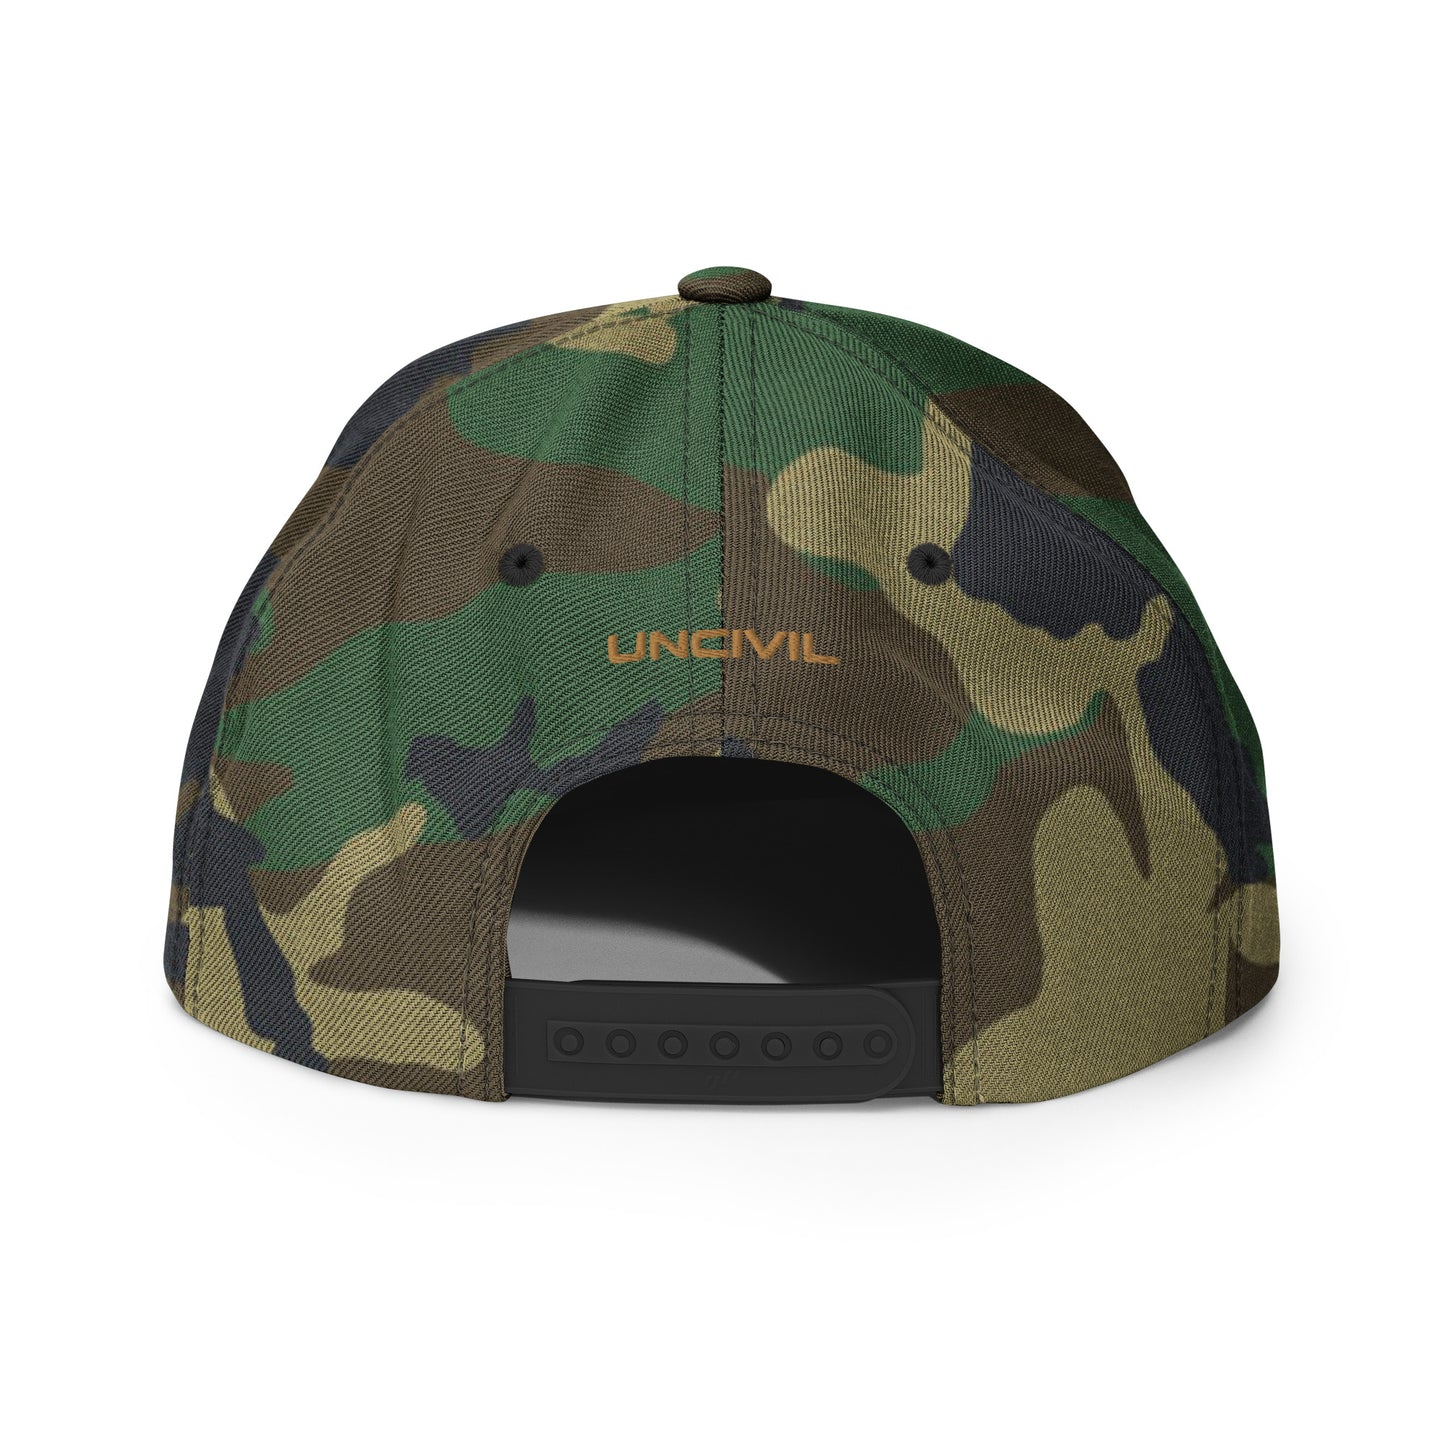 Embrace your patriotic side with our Camo and Gold Betsy Ross UNCIVIL Snapback hat. Featuring the iconic 13 stars design, this hat is perfect for anyone who loves America and its rich history.